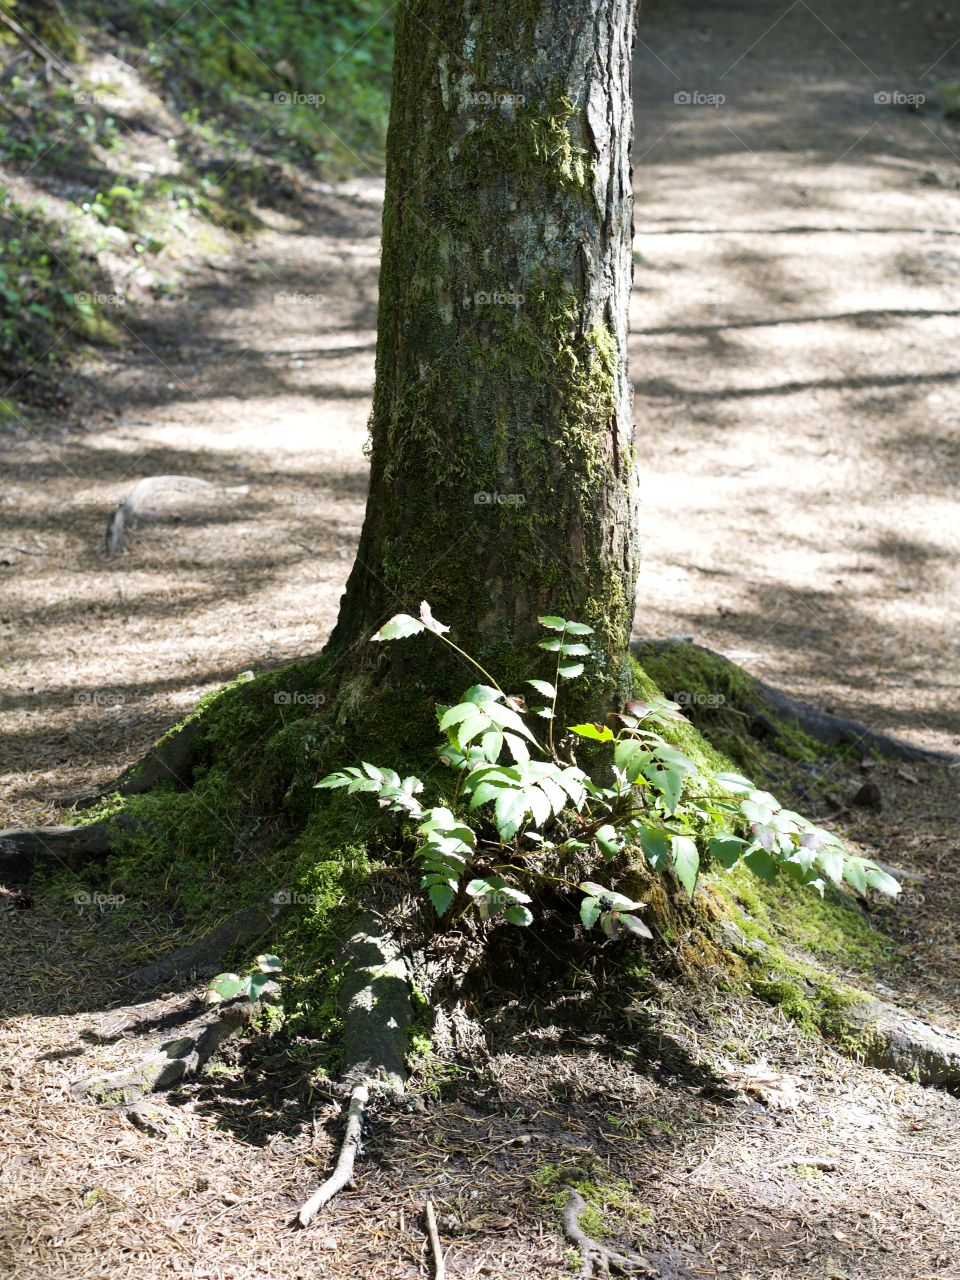 A tall fir tree with lots of moss and exposed roots provides shelter for an Oregon Grape bush along a trail near the Clearwater River in Southern Oregon on a sunny spring day. 